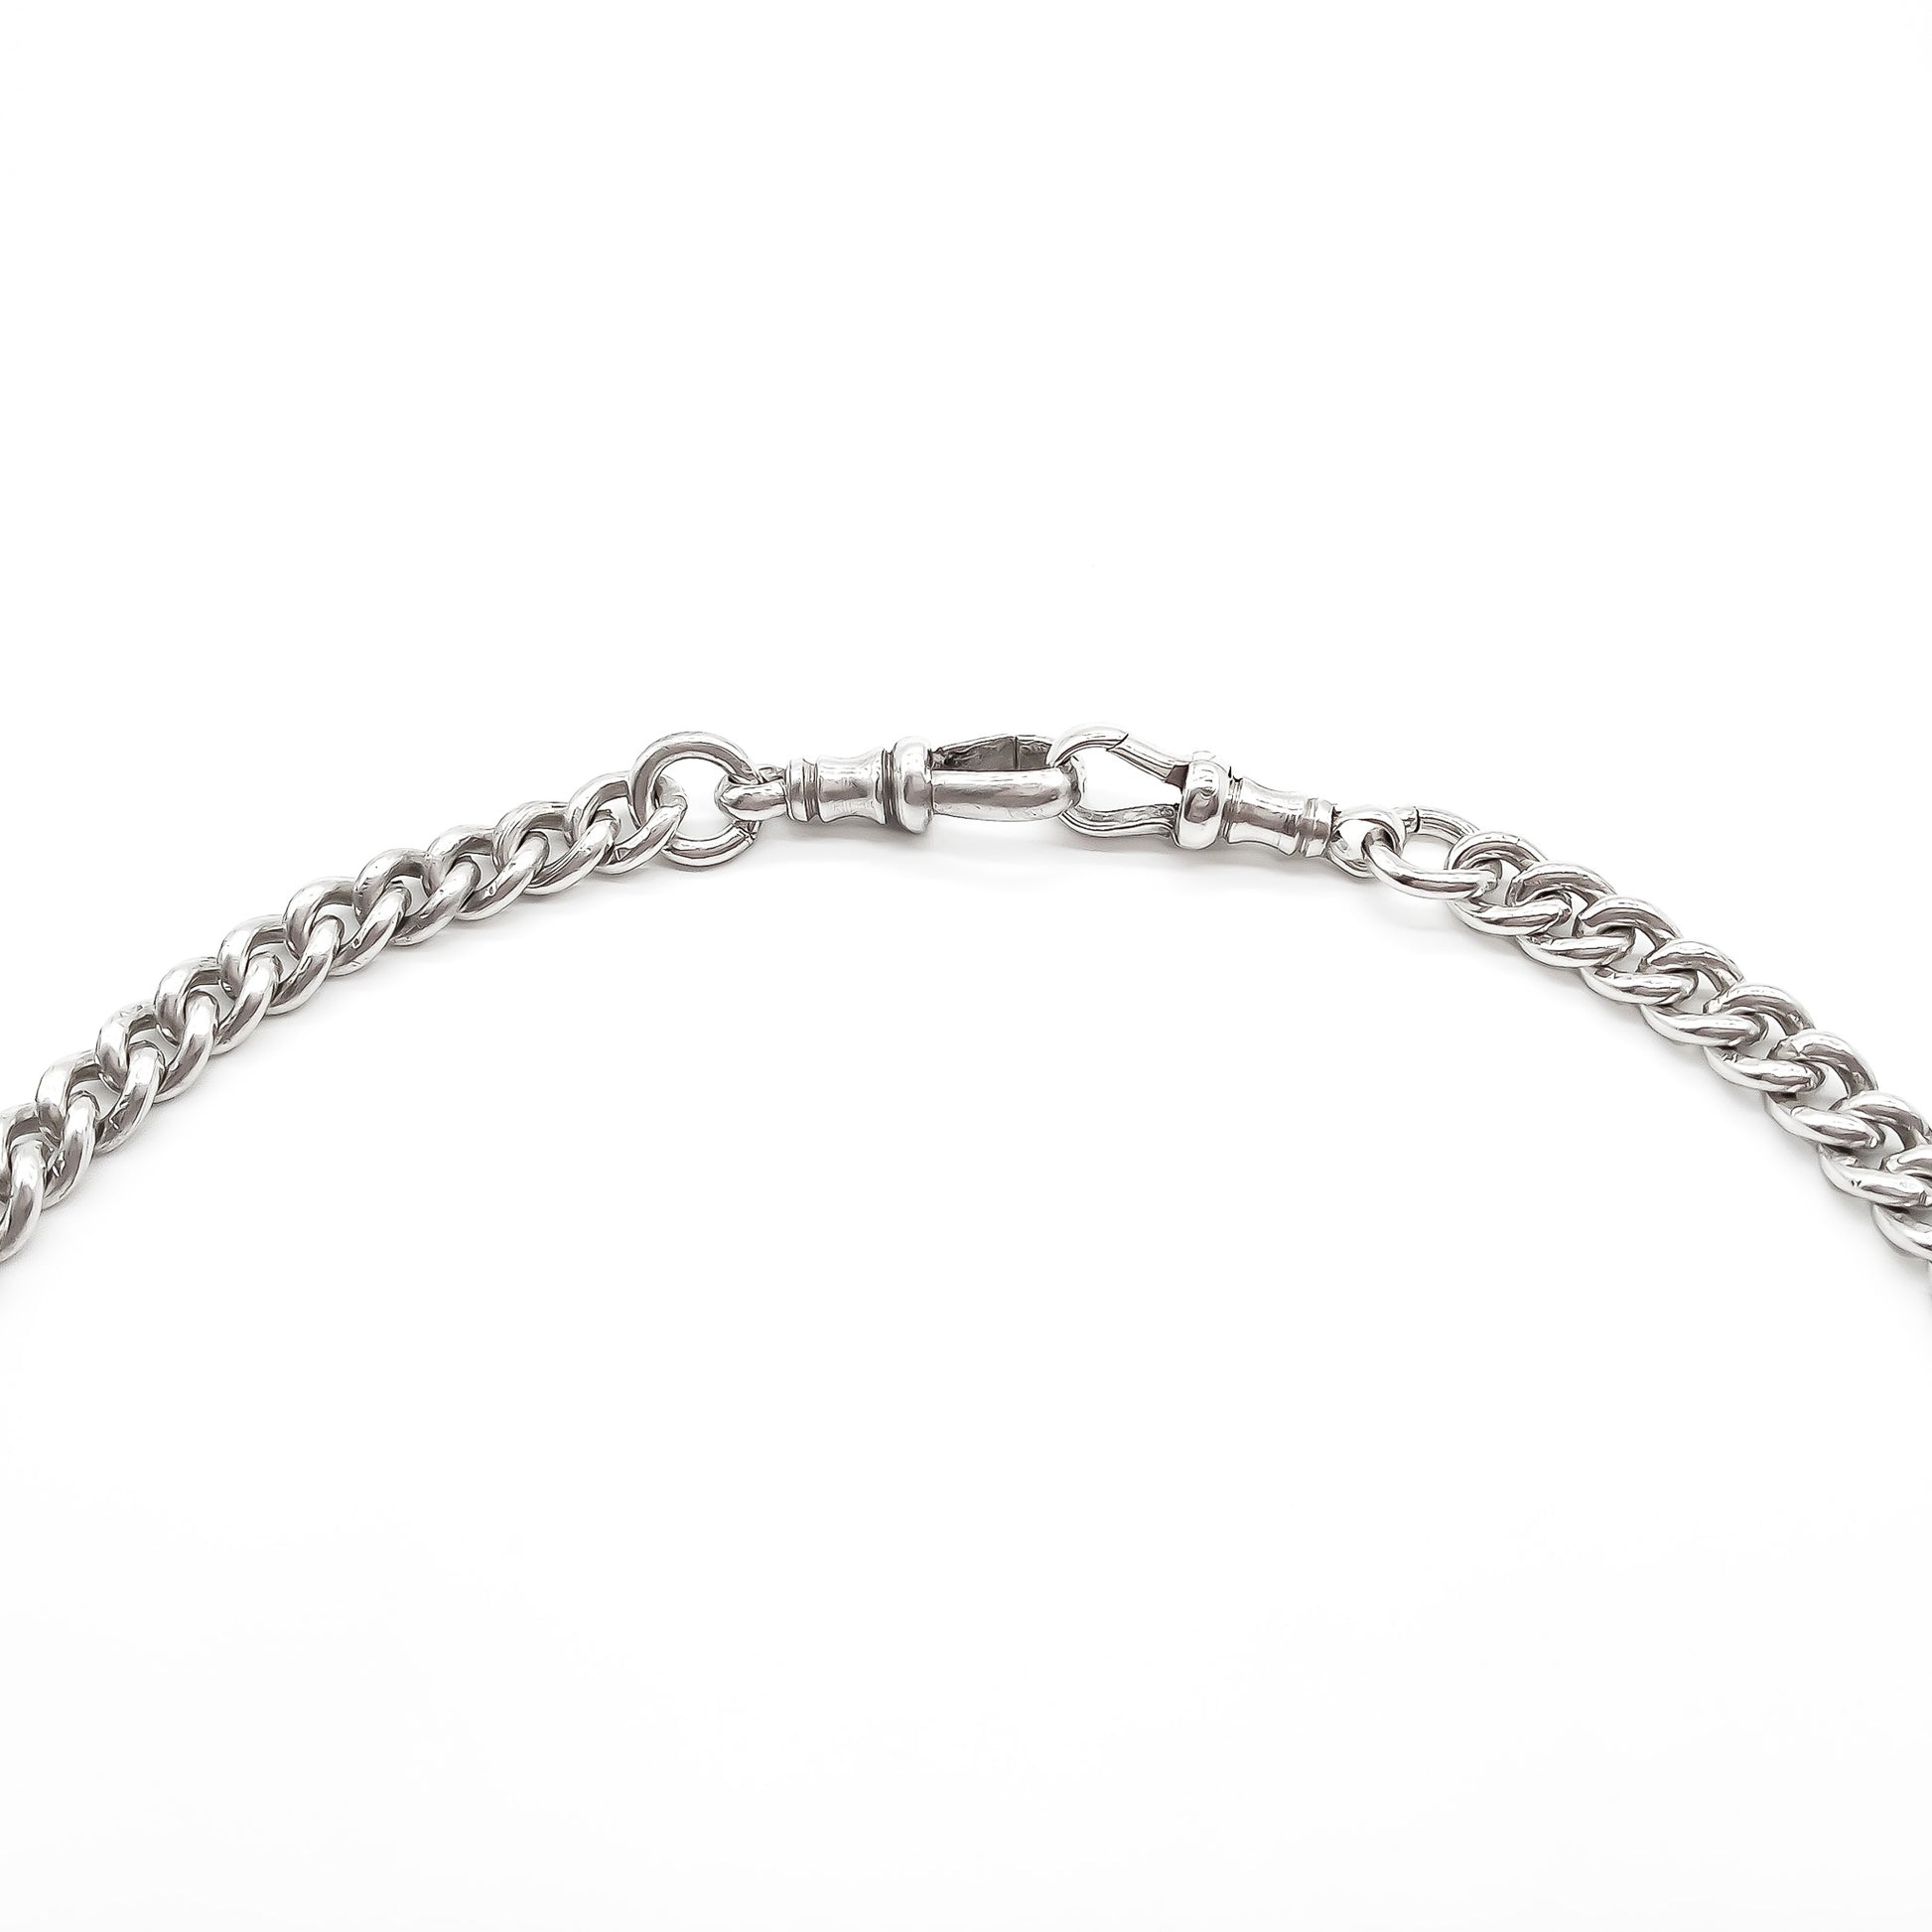 Classic sterling silver Victorian curb link fob chain with a t-bar and two dog clips. Every link is stamped.